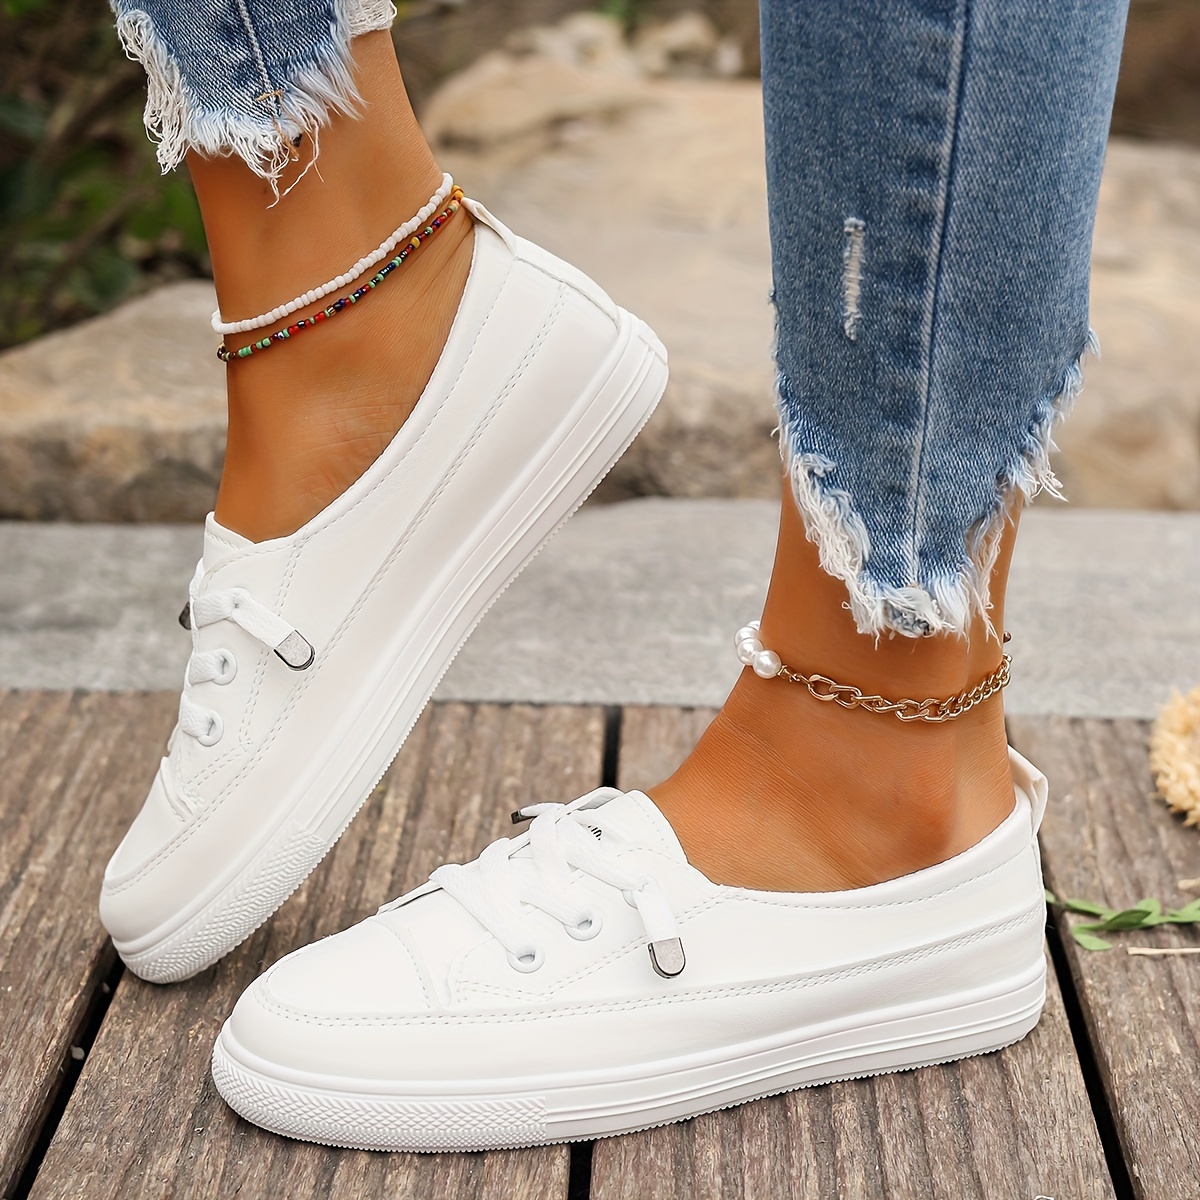 white skate shoes women s casual low top slip flat shoes details 4